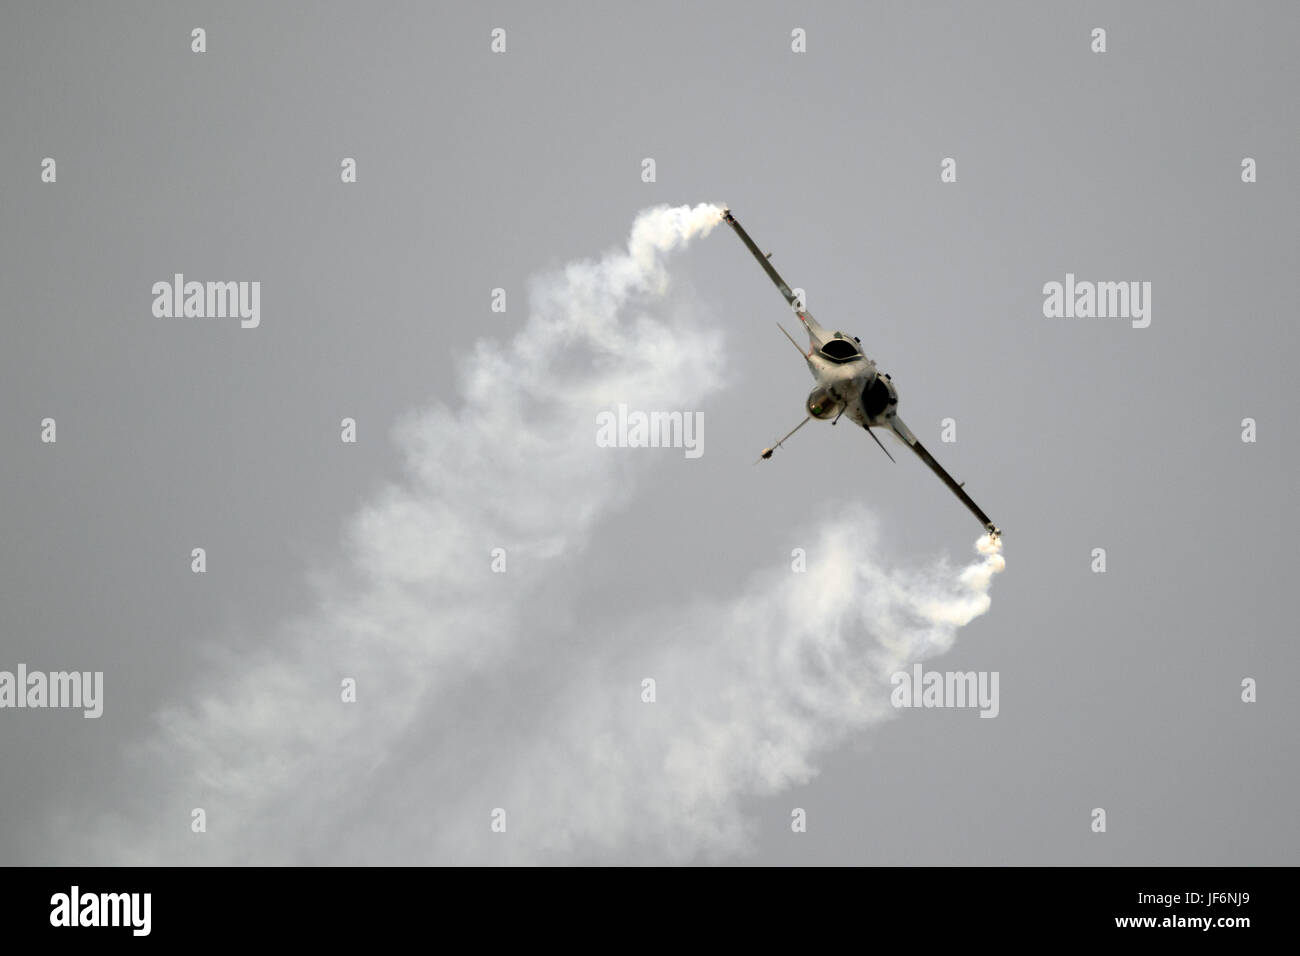 PARIS, FRANCE - JUN 22, 2017: French Air Force Dassault Rafale fighter jet performing at the Paris Air Show 2017 Stock Photo